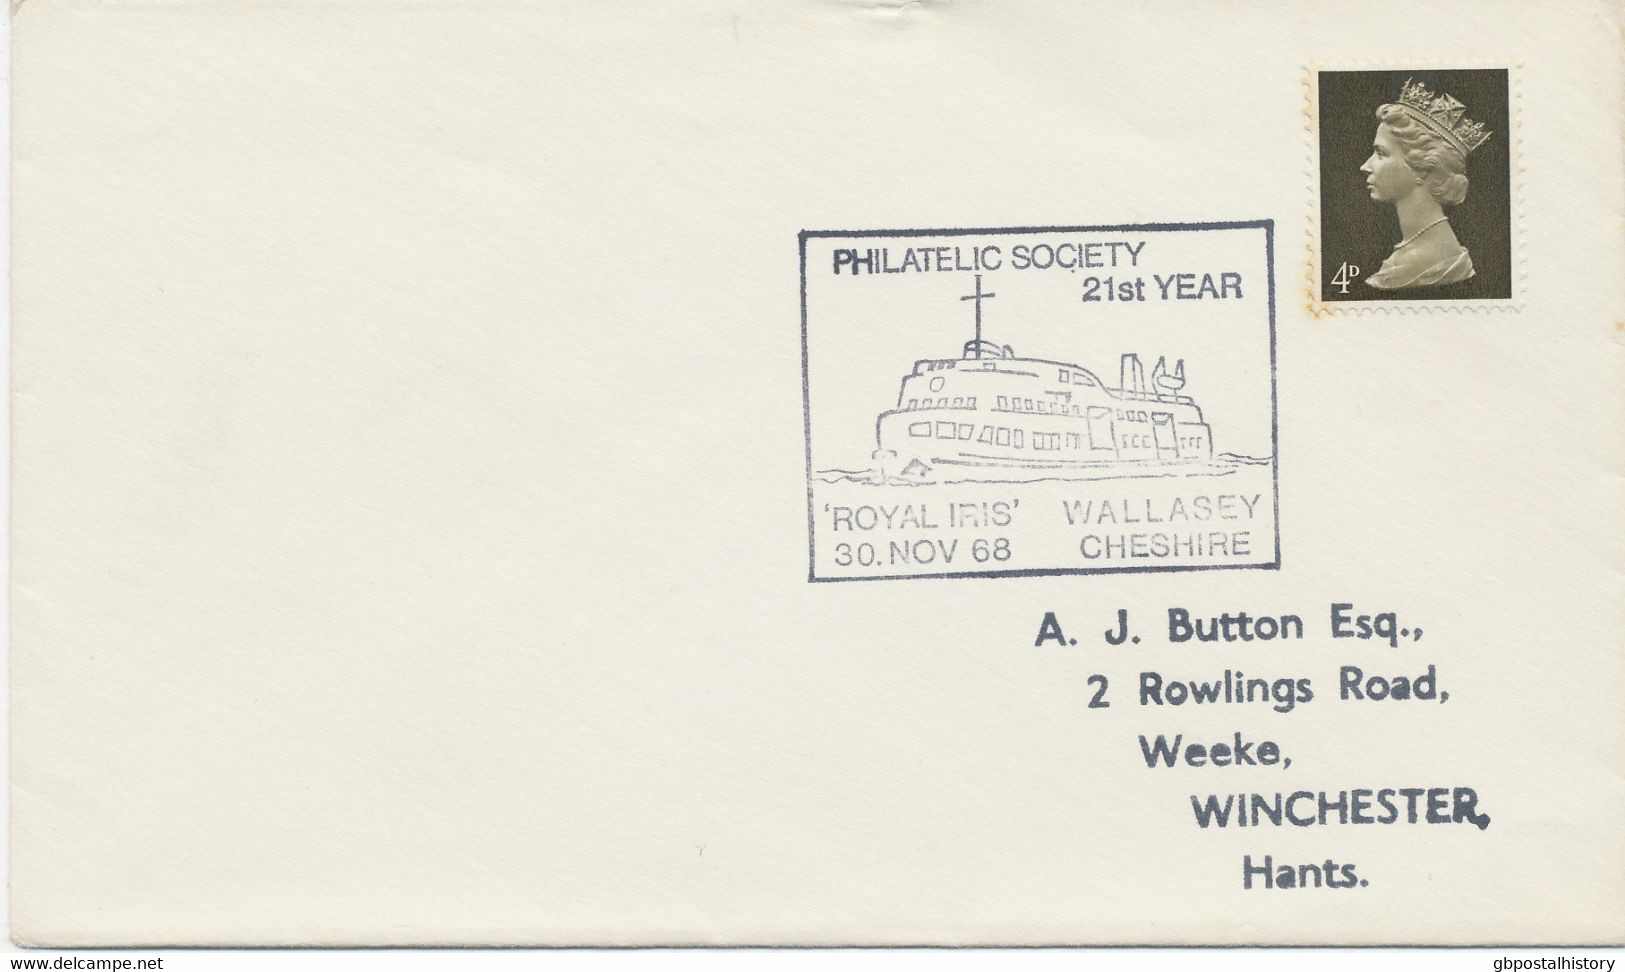 GB SPECIAL EVENT POSTMARKS PHILATELY 1968 Philatelic Society 21st Year 'Royal Iris' Wallasey Cheshire - Lettres & Documents